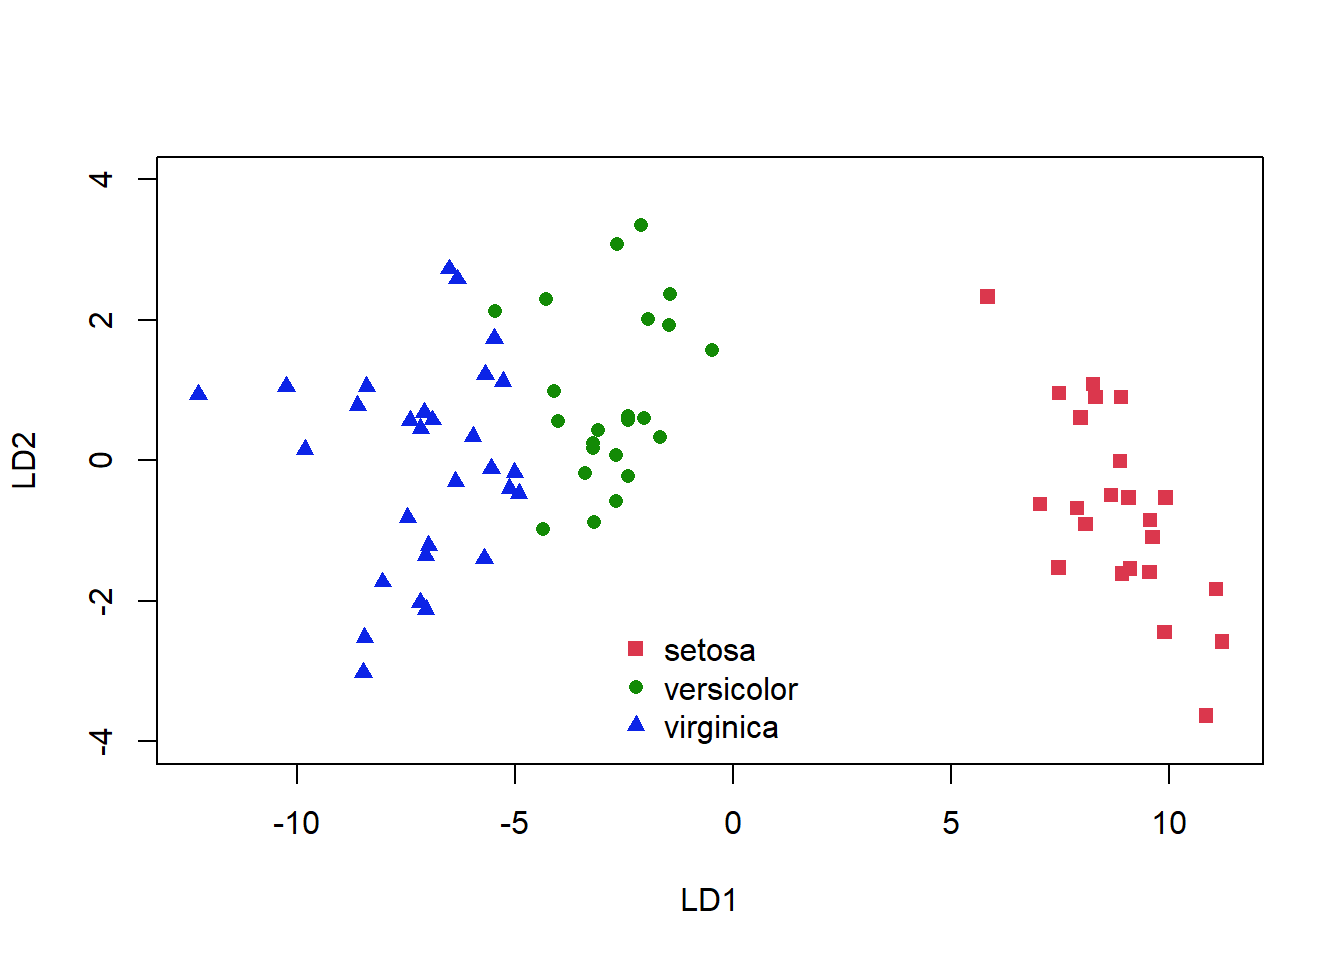 Graph of two LDA axses with symbols for each species where the colour of the symbol indicates the classification produced by the LDA model.